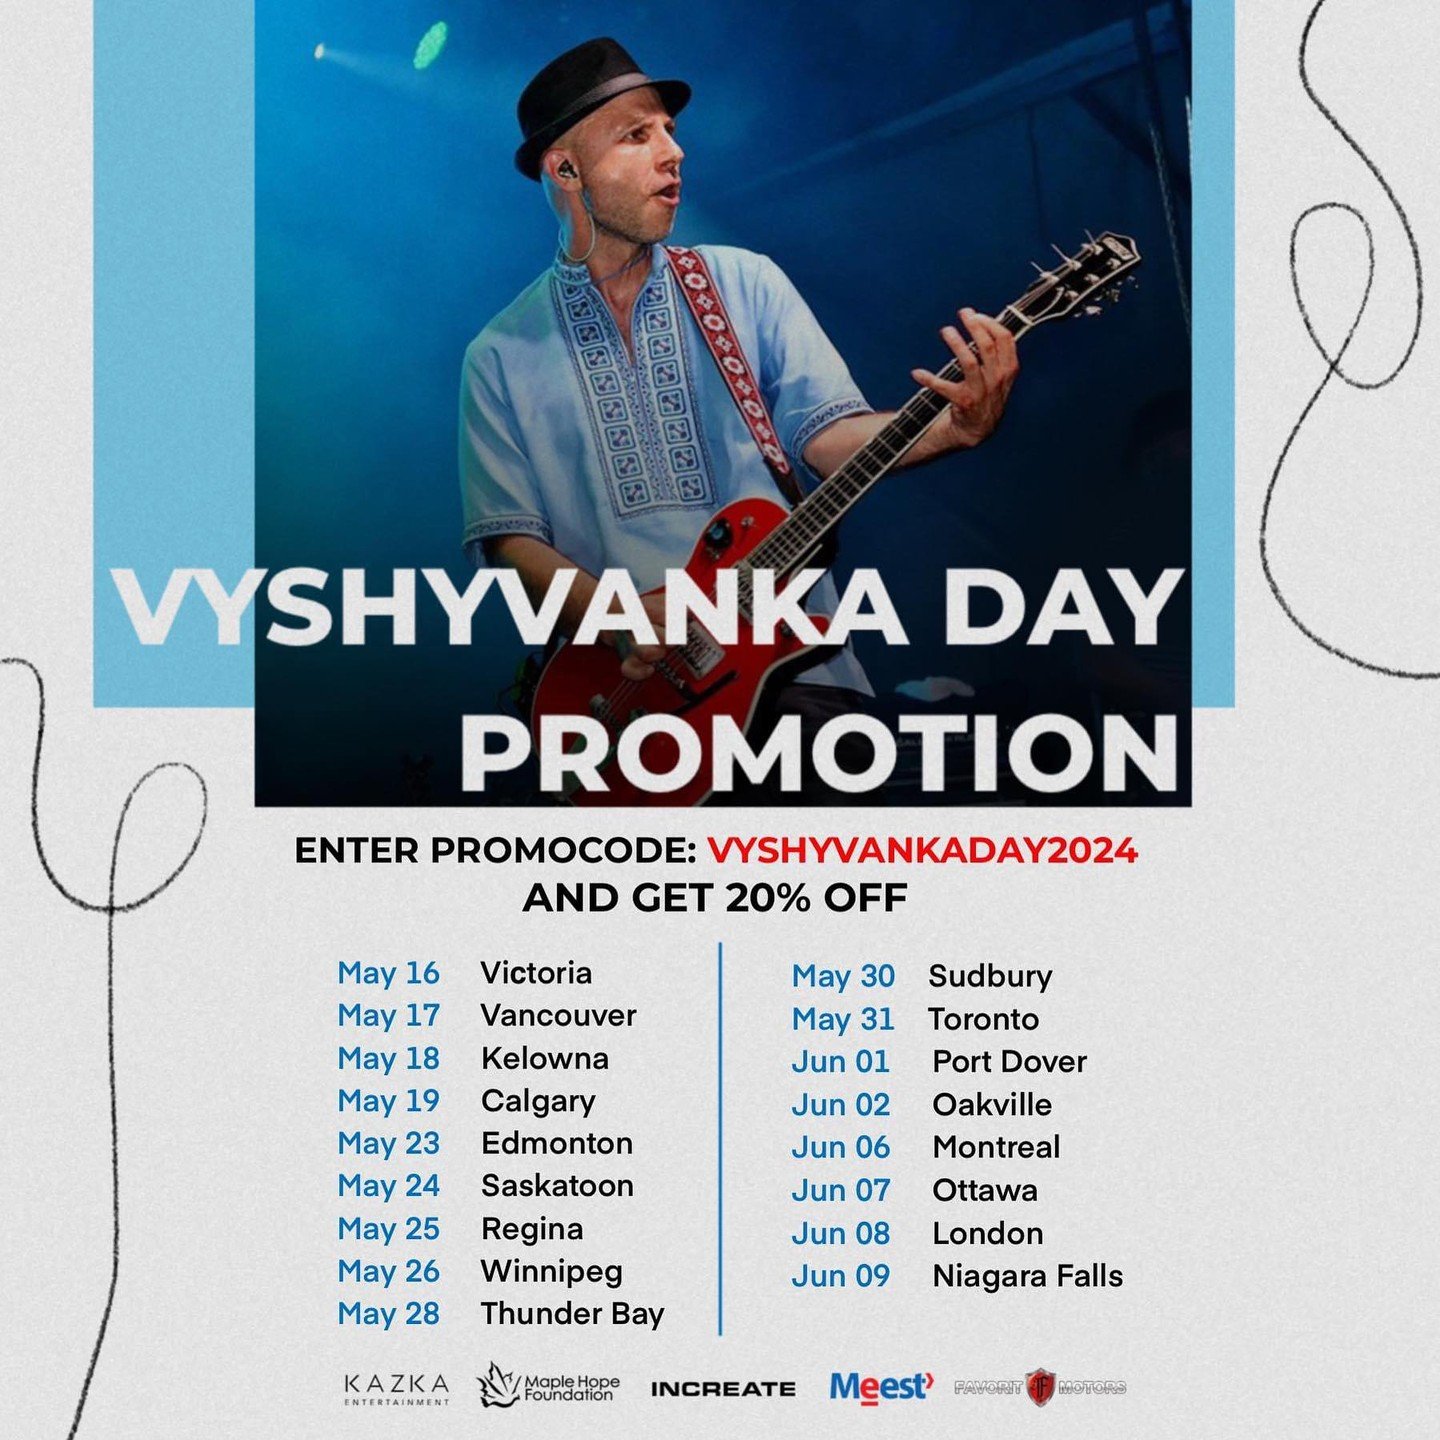 Did you know the lead singer from Mad Heads is doing a cross Canada solo tour? 🤩 
.
These concerts will become absolutely unforgettable for the energy, atmosphere, drive and sense of true Ukrainian unity! 🇺🇦
.
Use the promo code VYSHYVANKADAY2024 